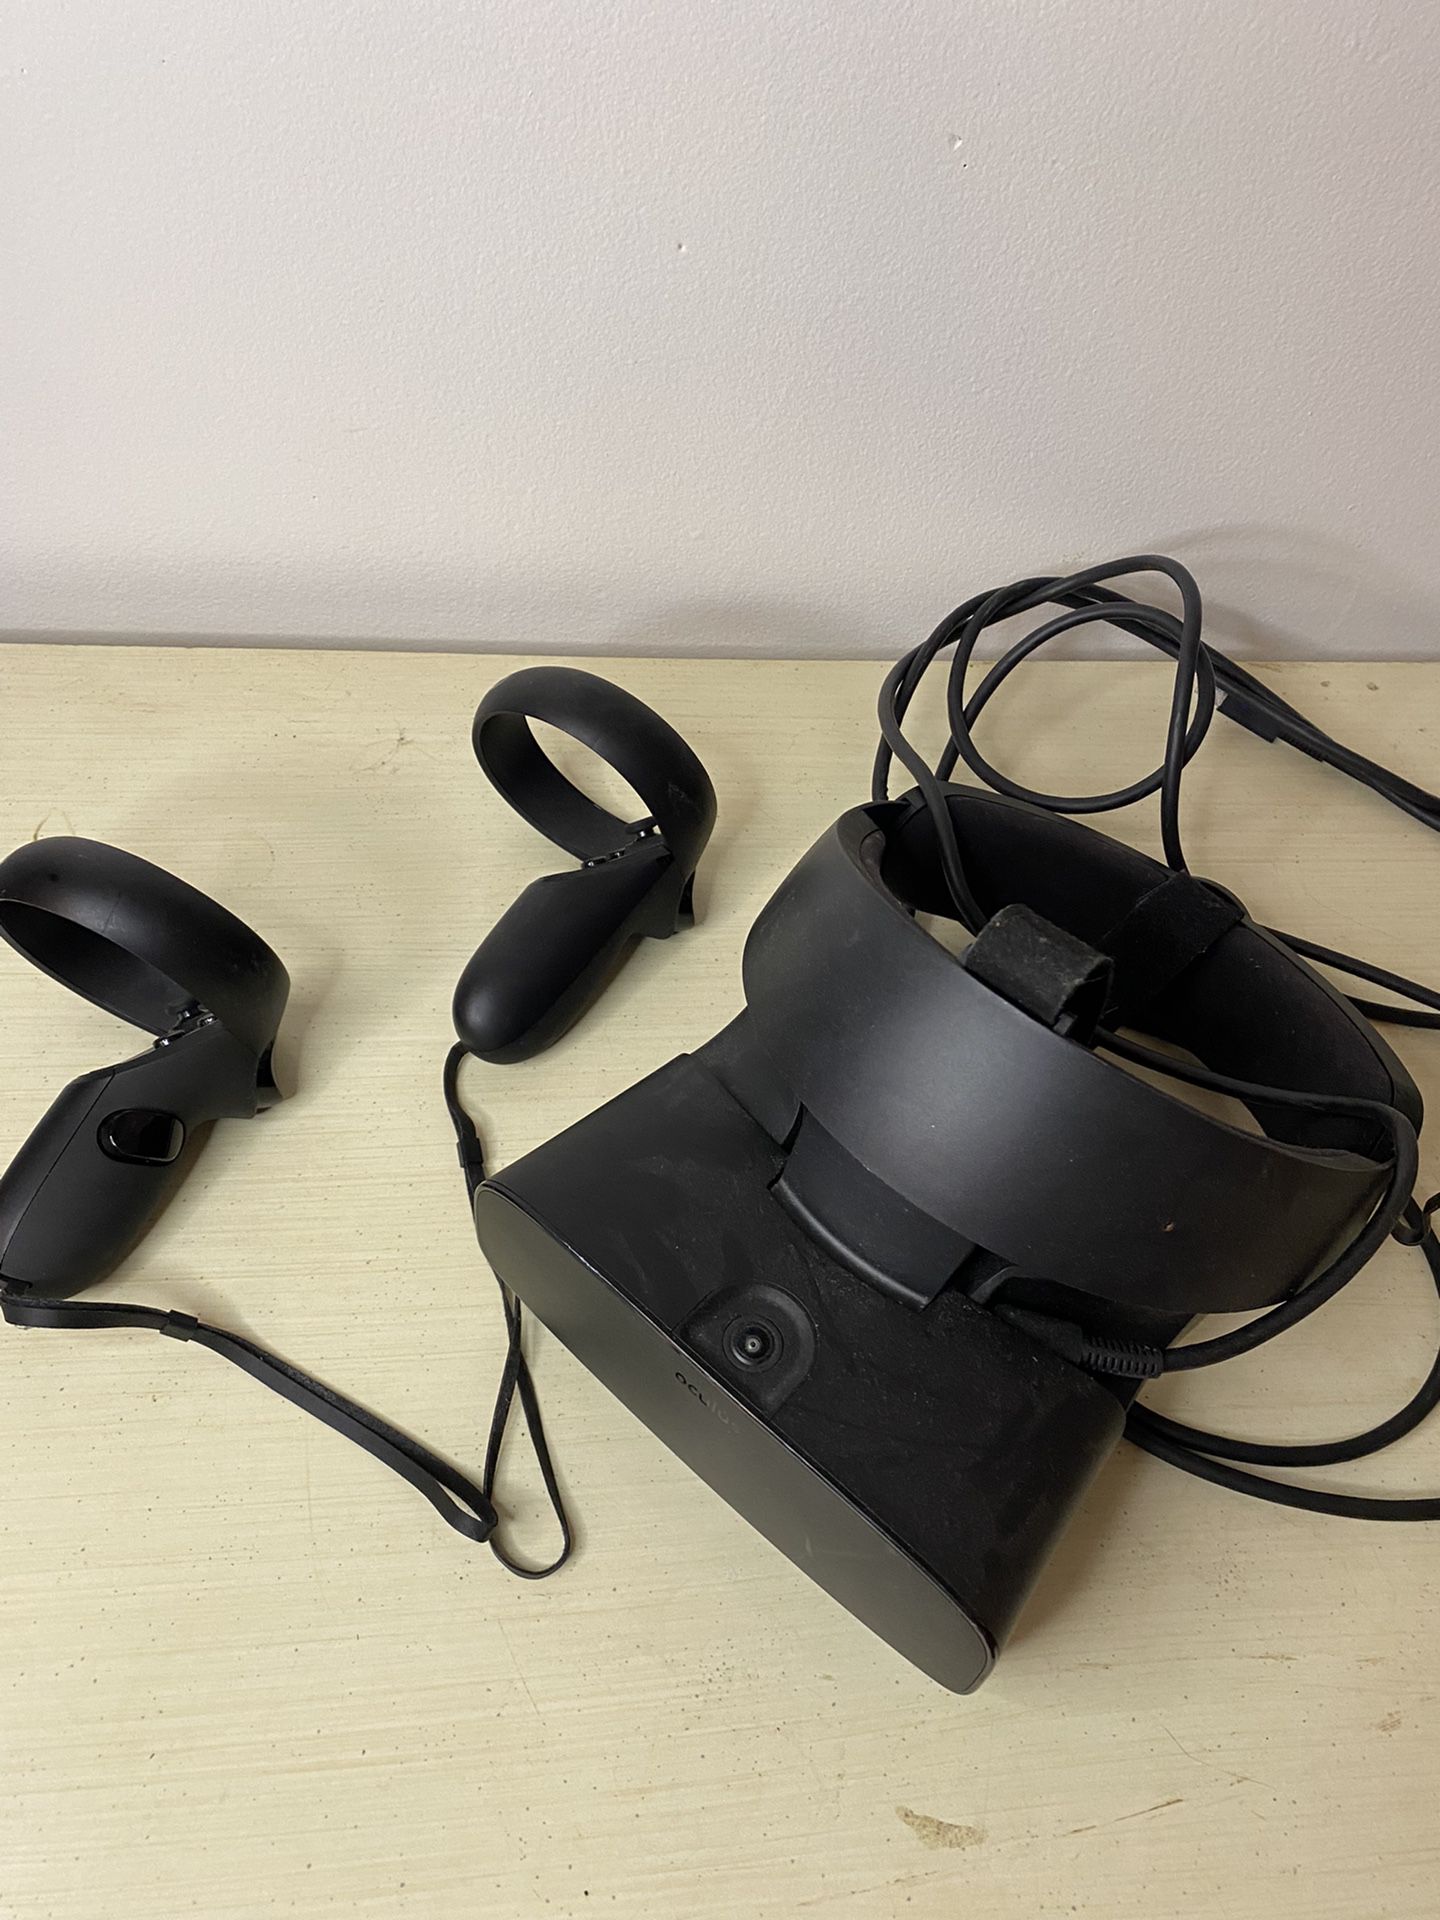 Oculus Headset and Hand controllers